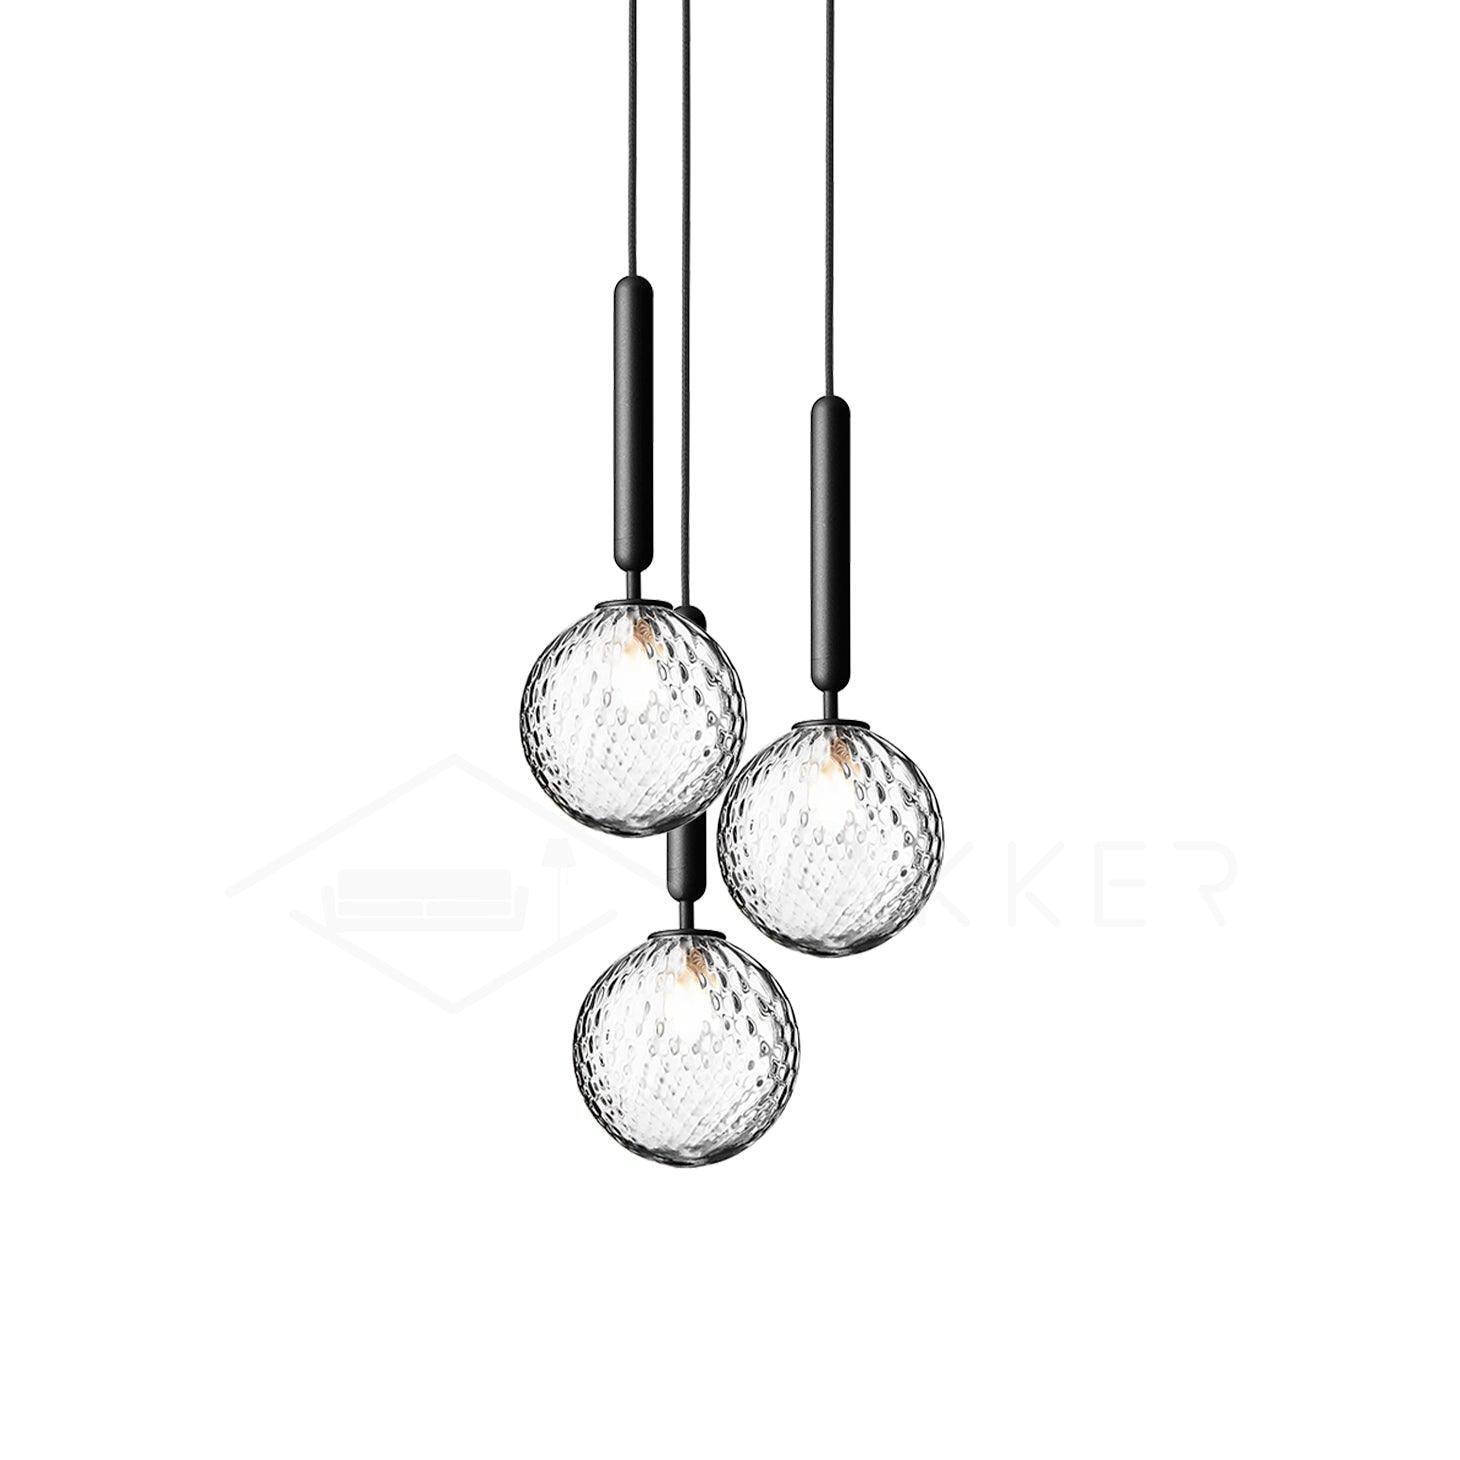 Black Miira Pendant Light with 3 Heads, Diameter 7.9 inches x Height 59 inches (20cm x 150cm), Clear